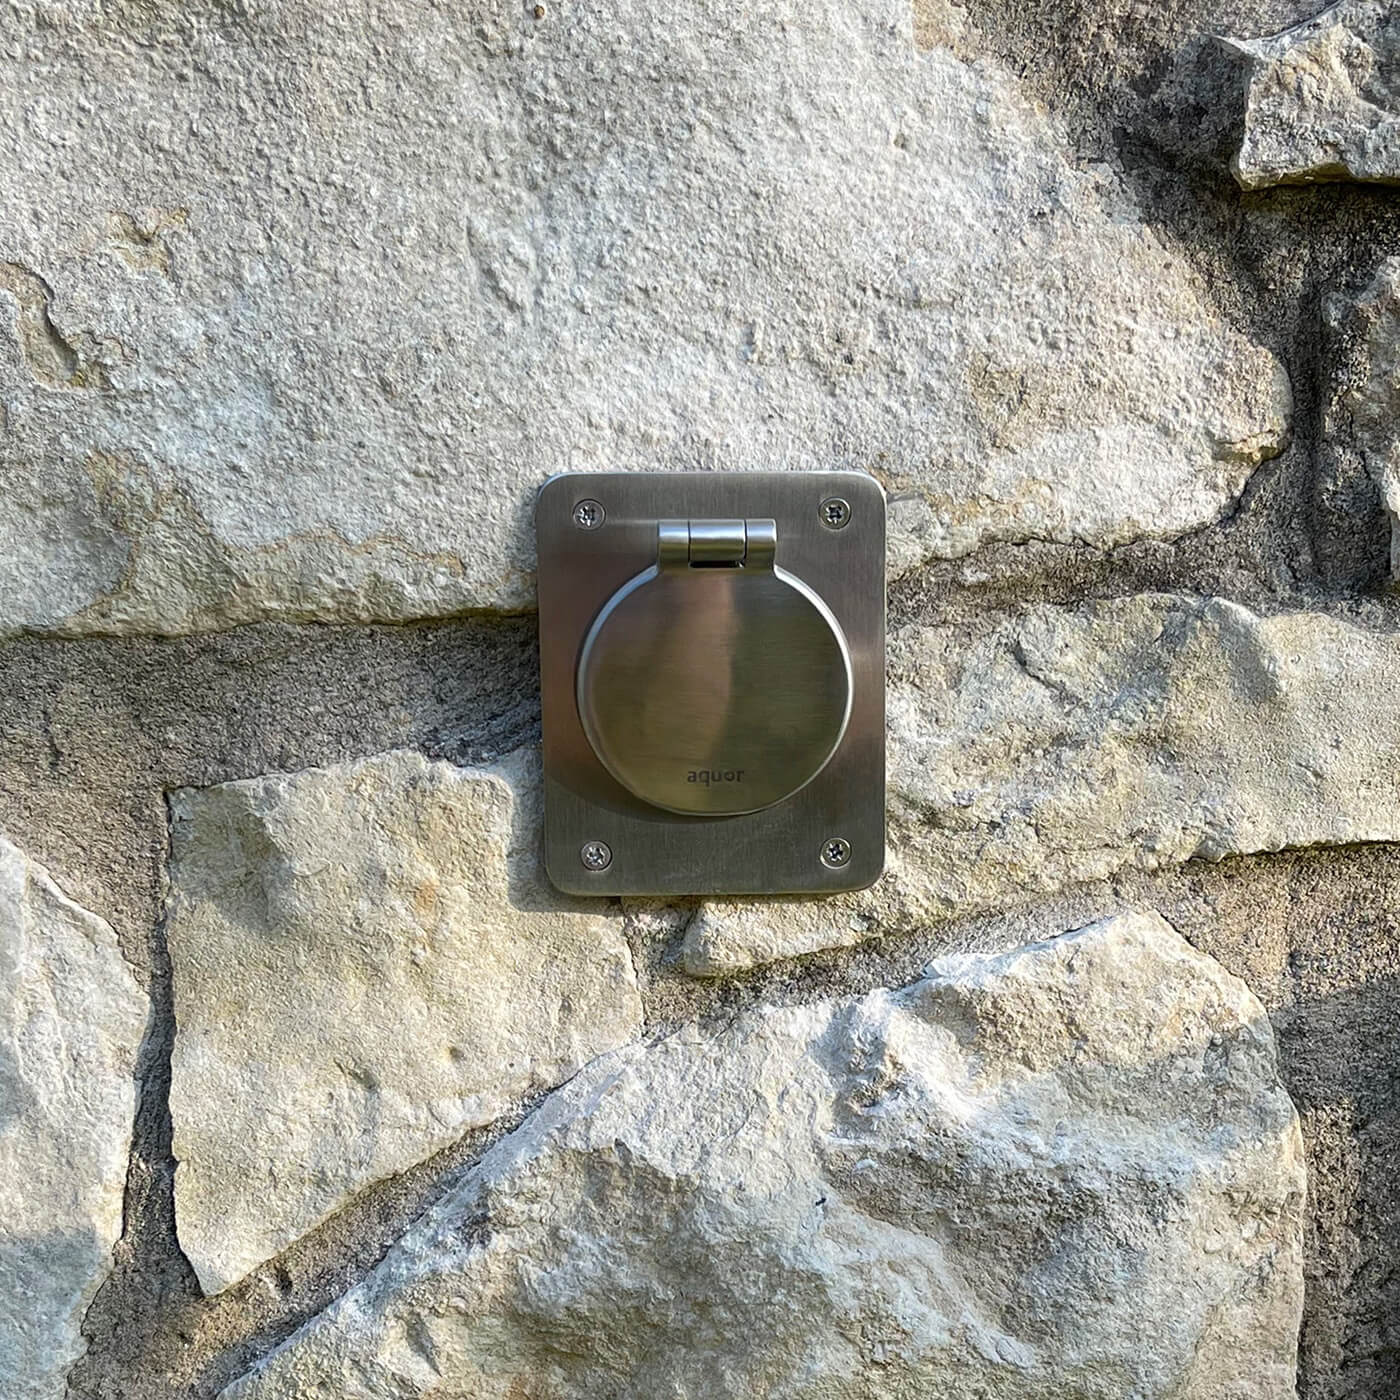 Stainless Steel Mounting Plate V1+ installed on stone with a House Hydrant V1+ Brushed Stainless Model